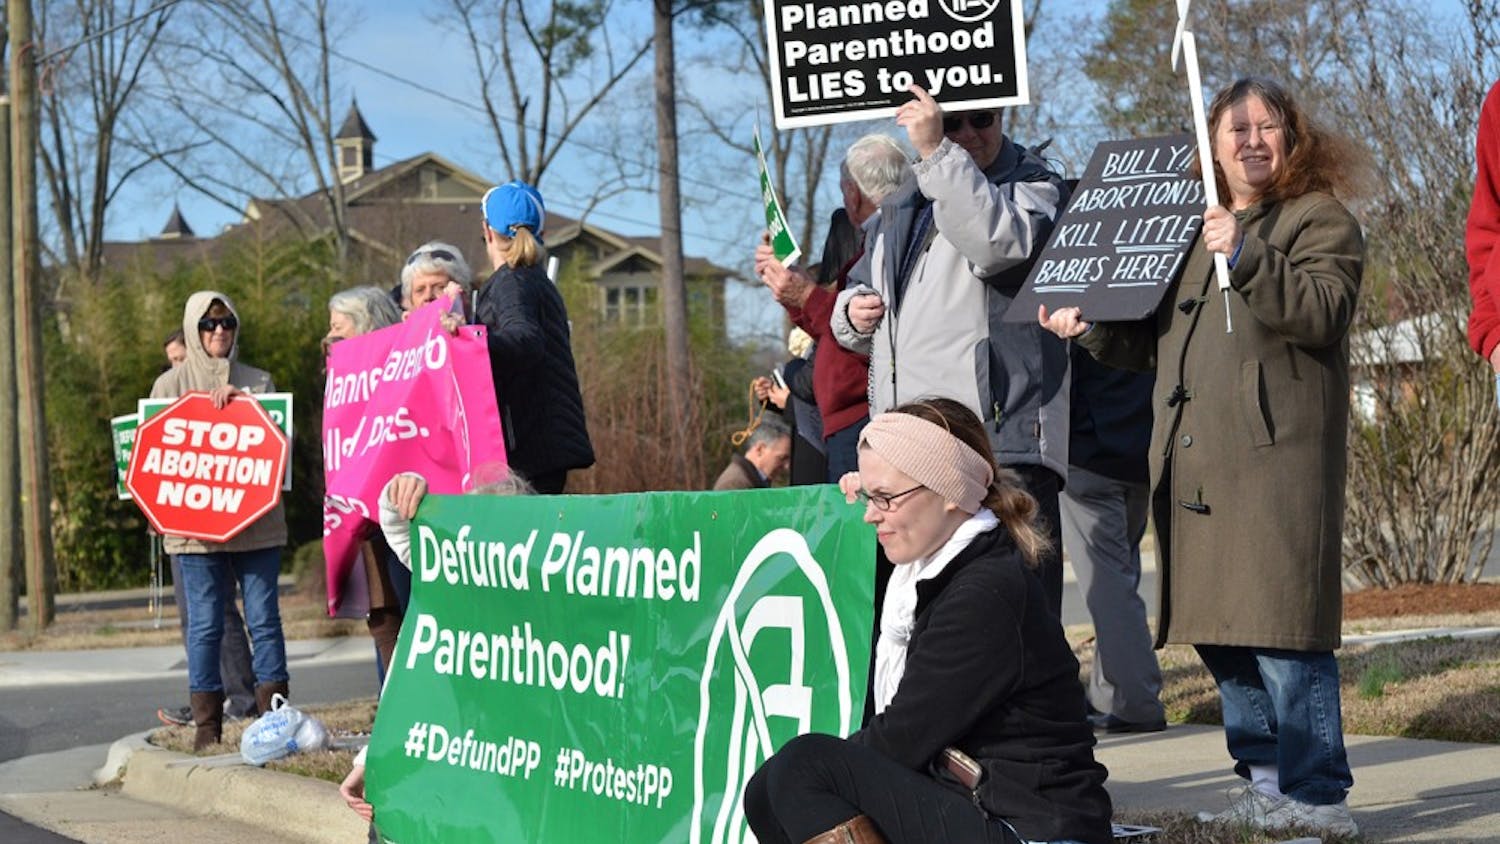 People protest against abortion and Planned Parenthood outside the Planned Parenthood building on Dobbins Drive on February 11, 2017.